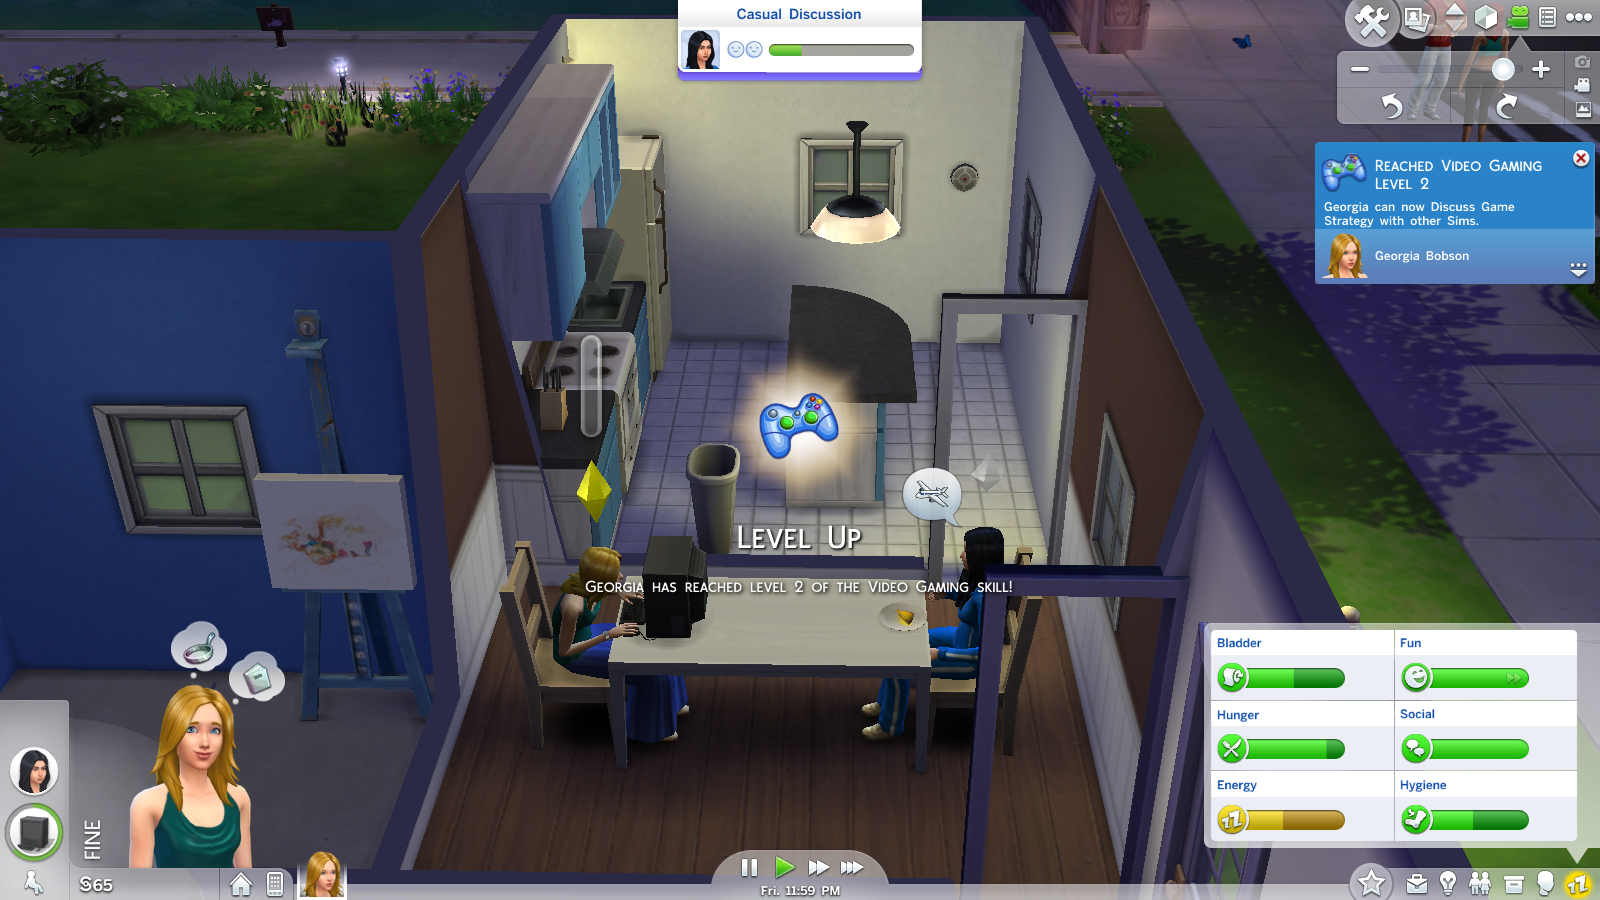 The Sims 4 multi-tasking doing two things at once